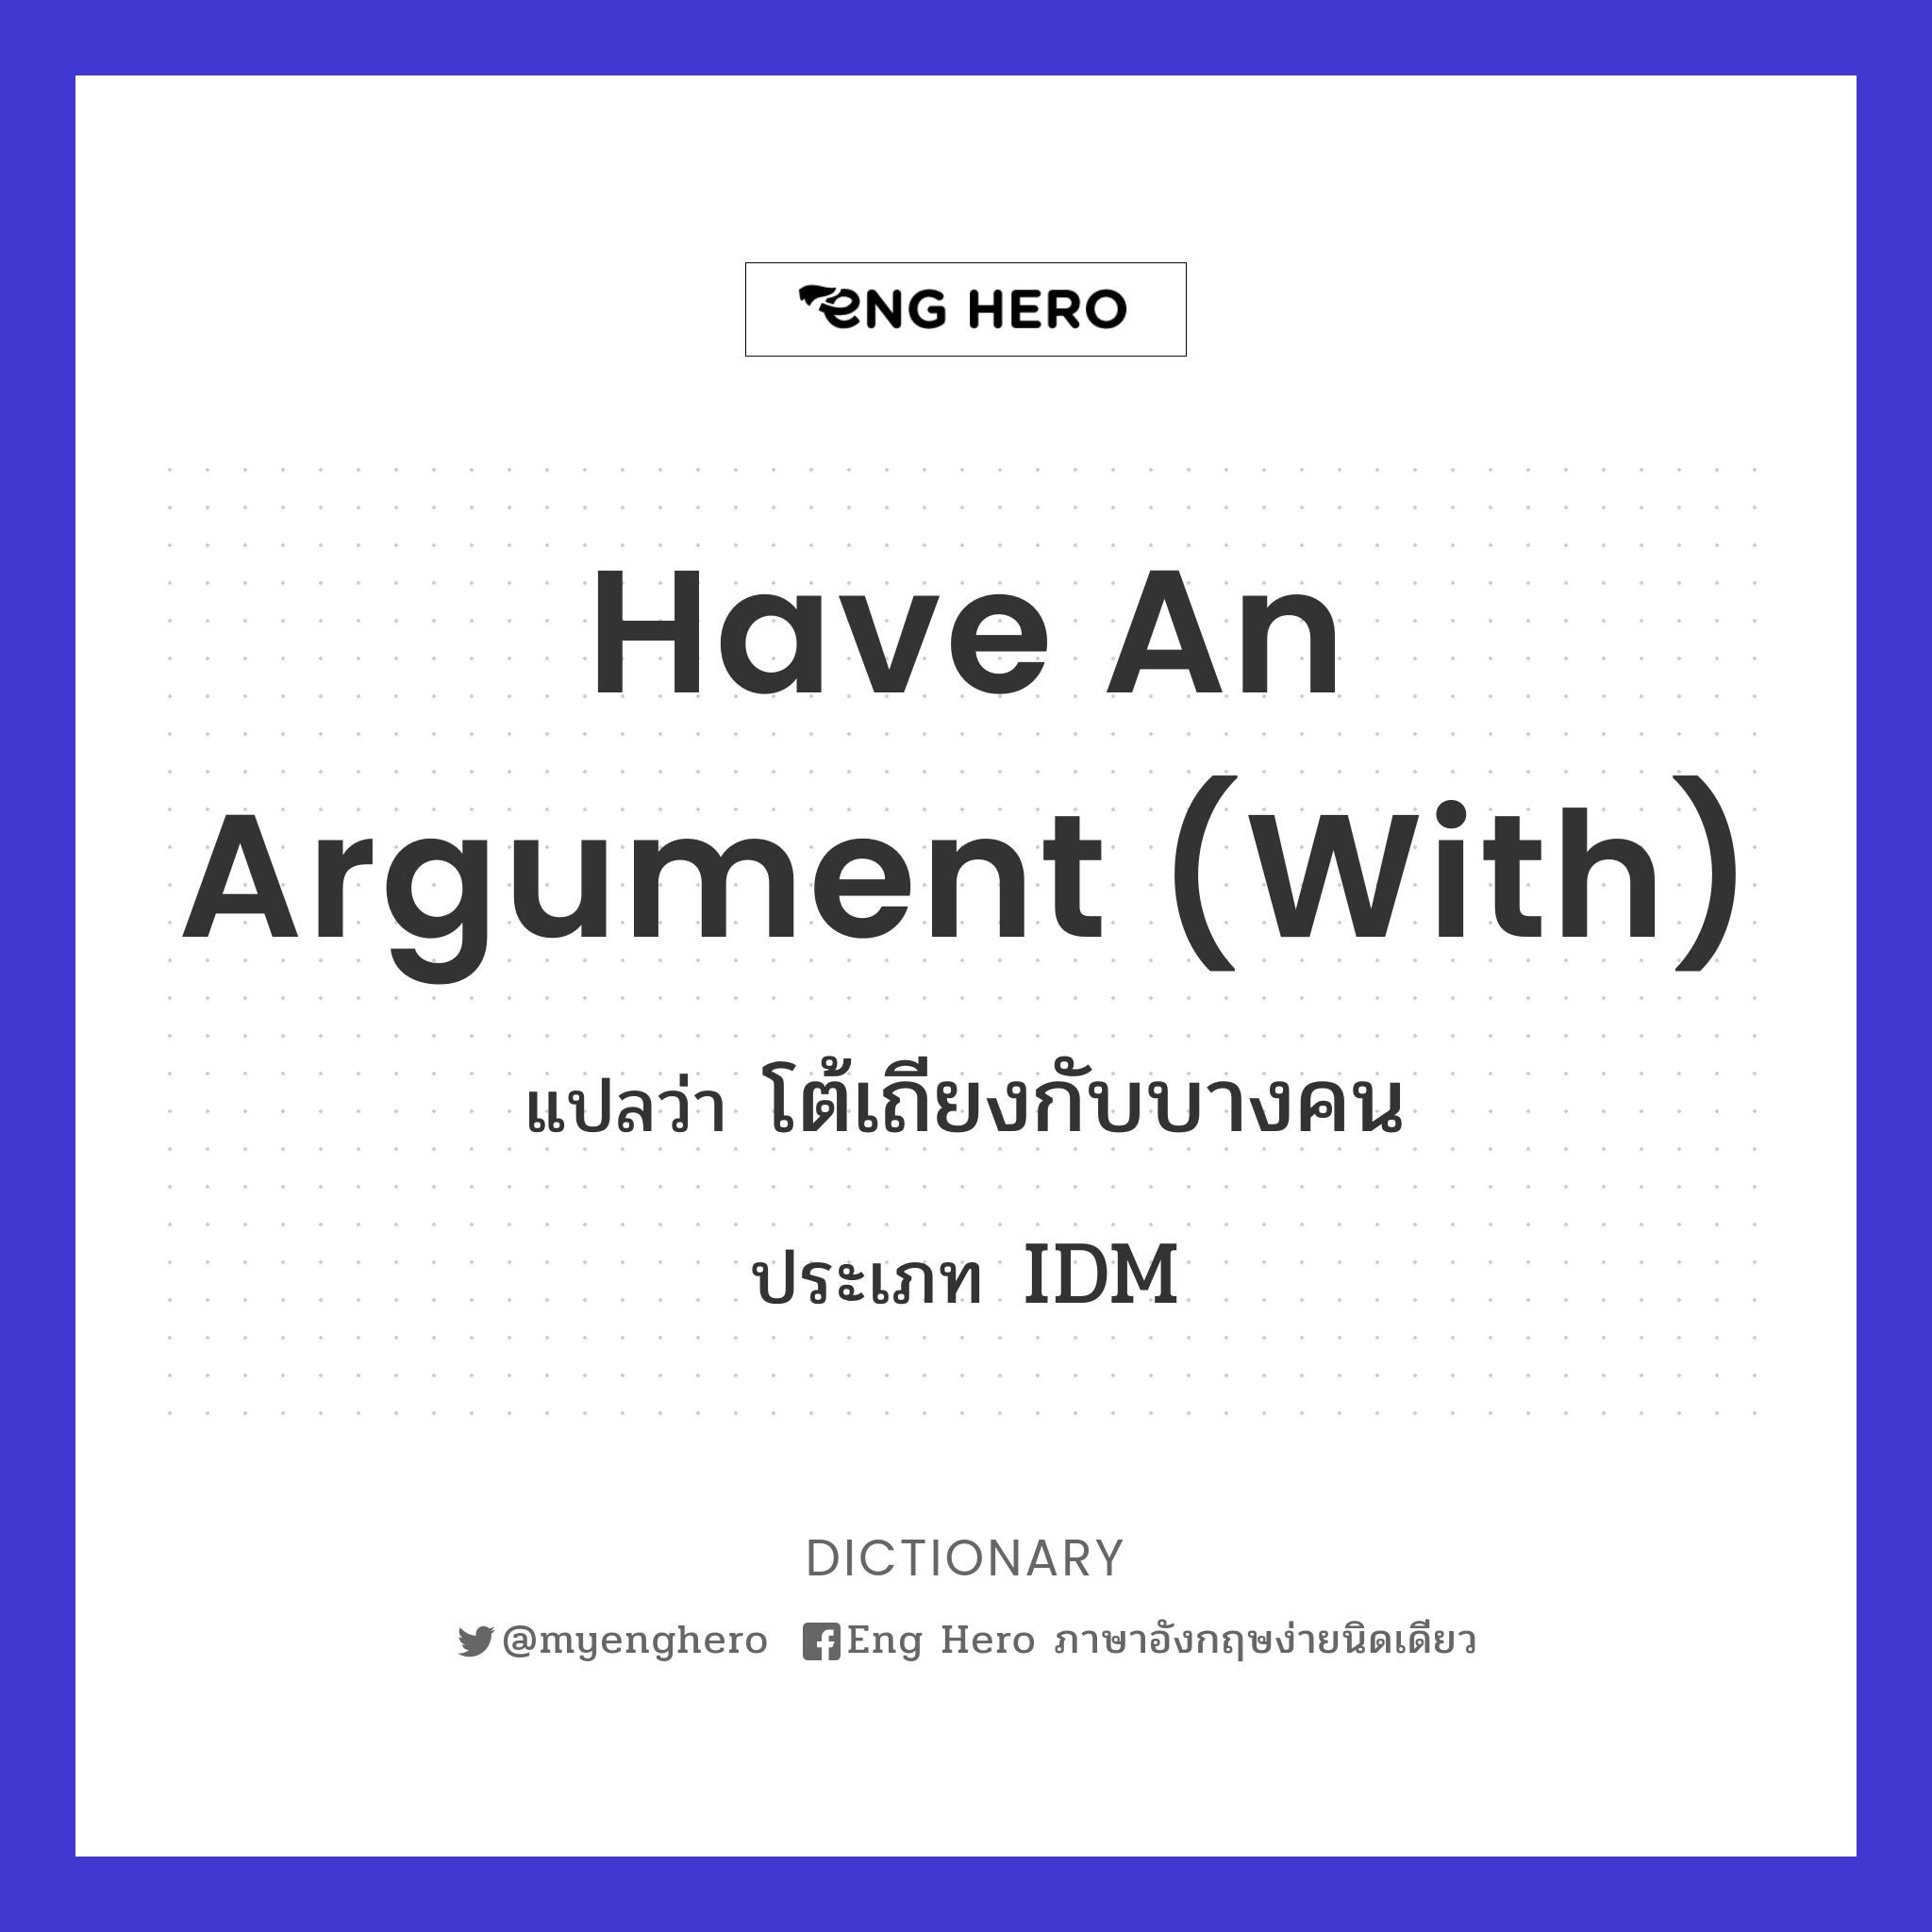 have an argument (with)